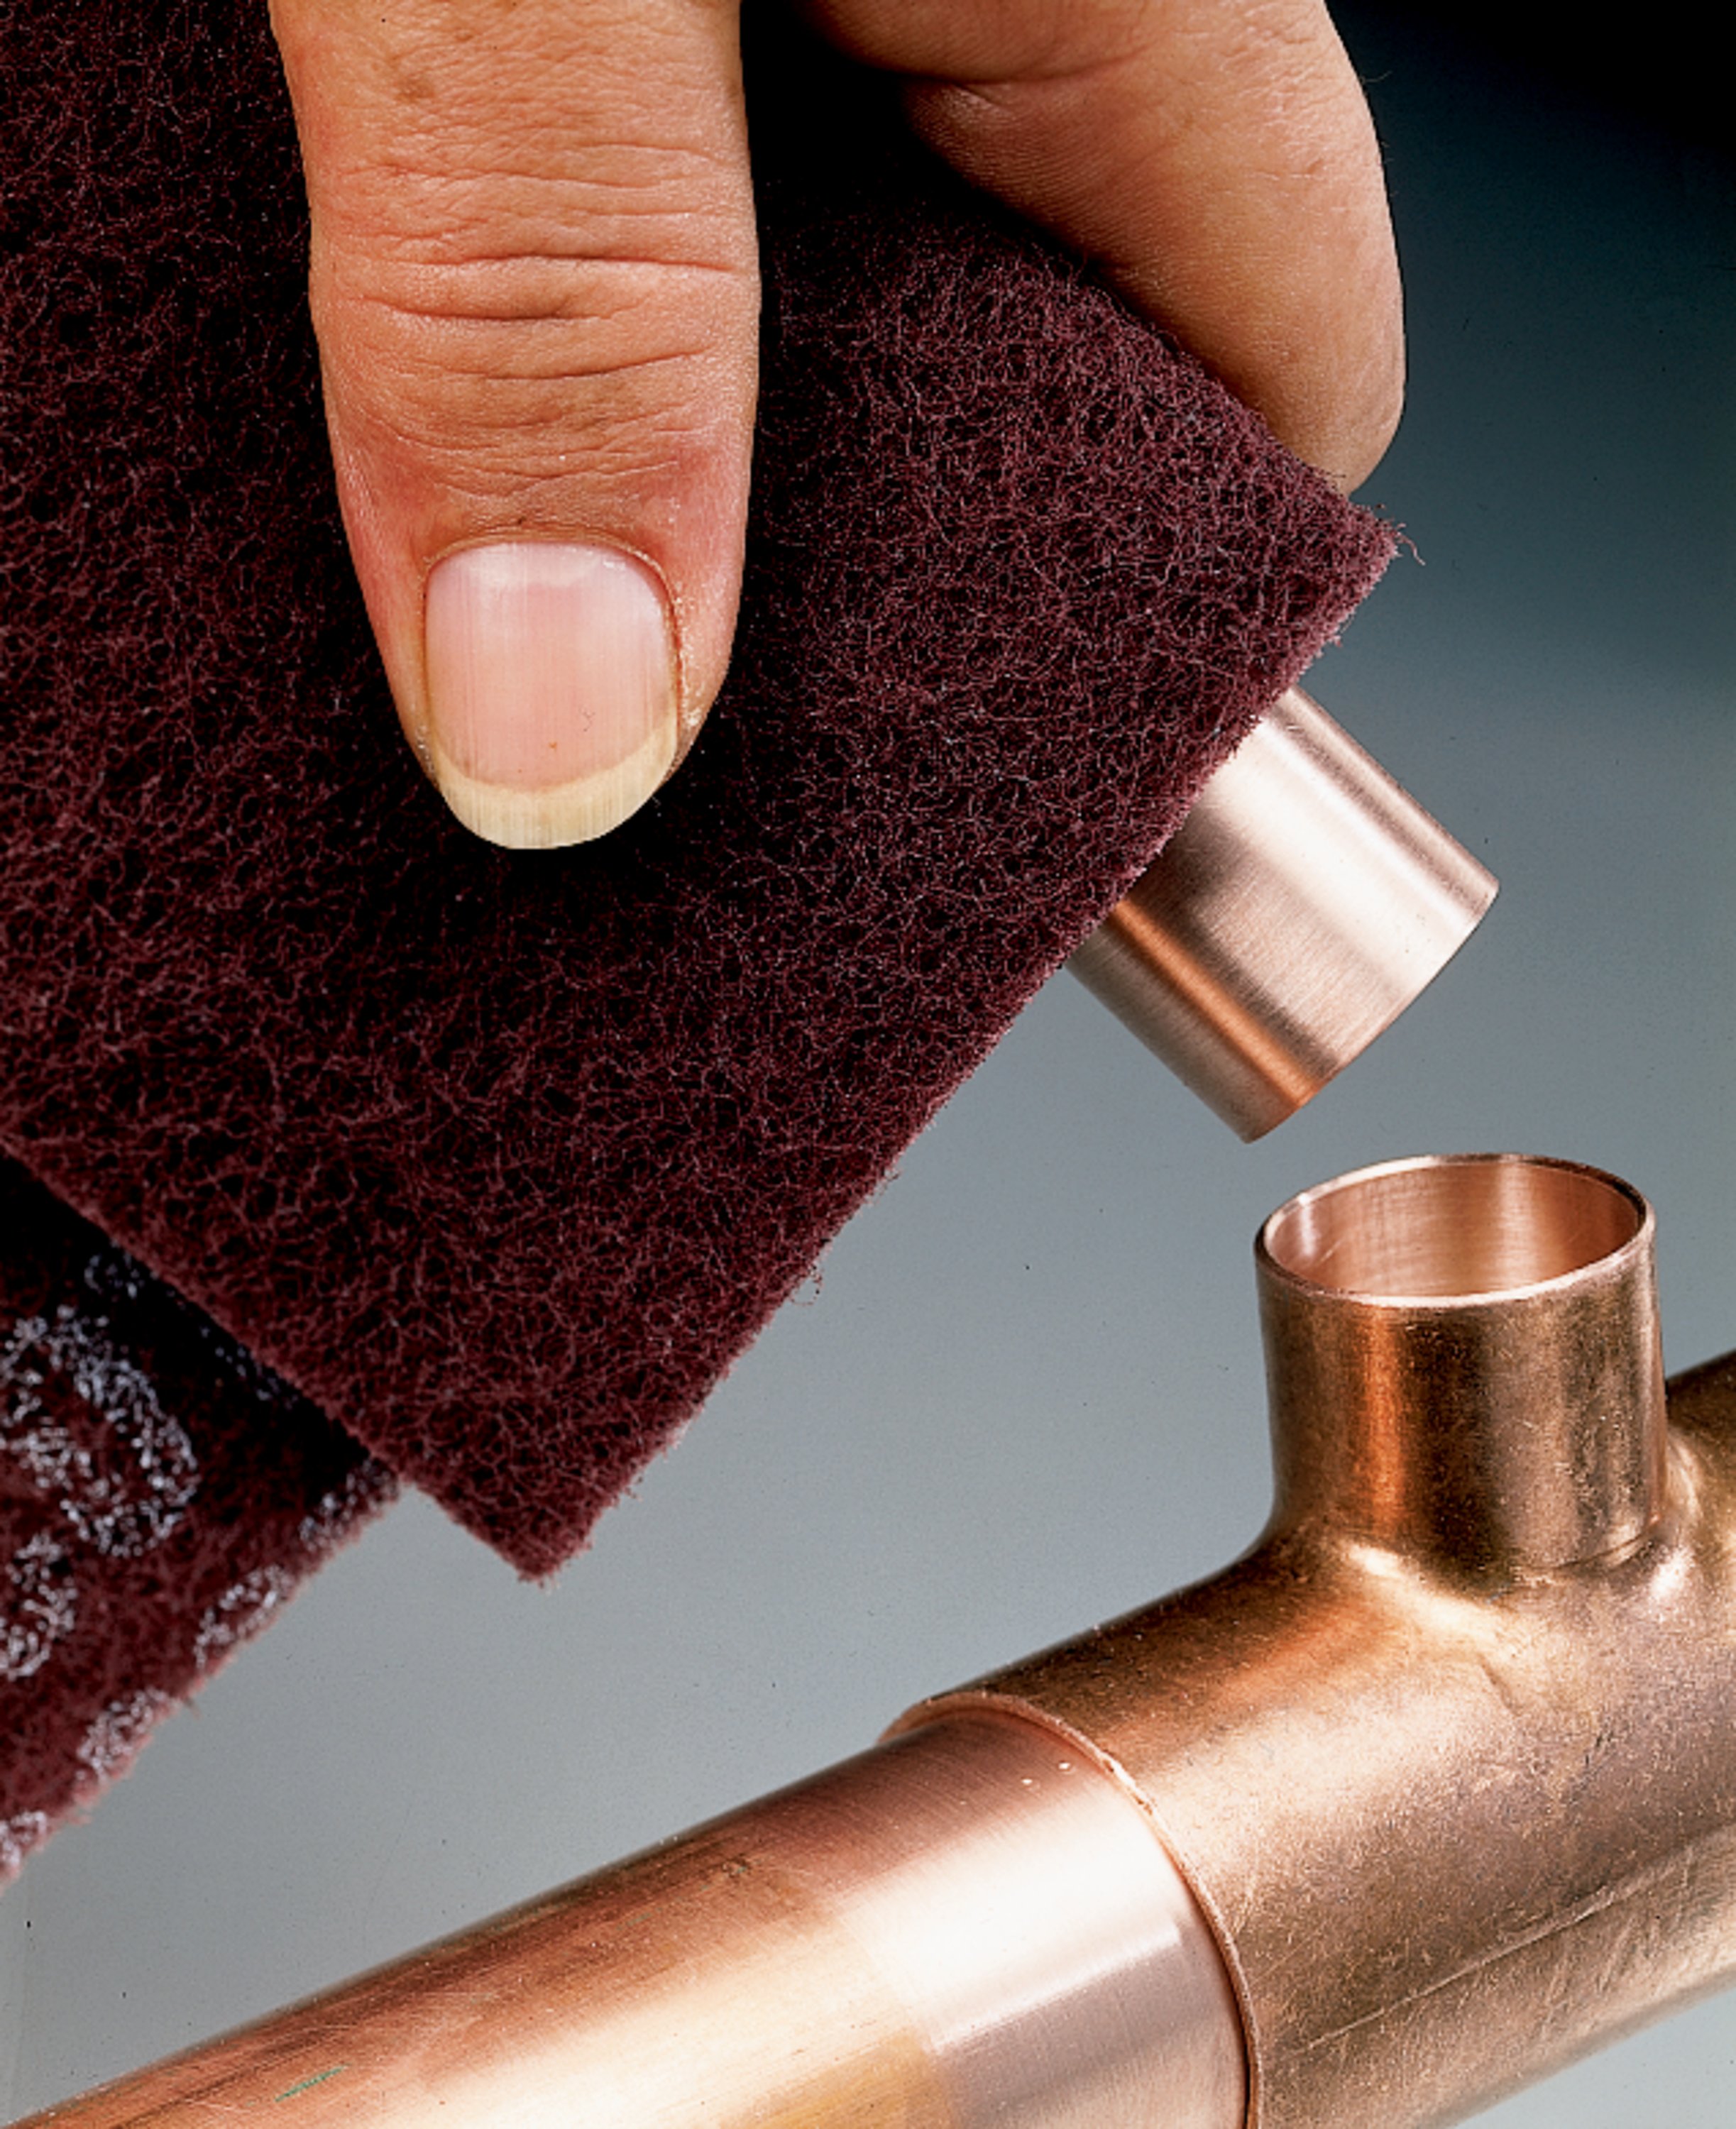 Scotch-Brite™ General Purpose Hand Pad 7447 is comparable to steel wool grade 1.